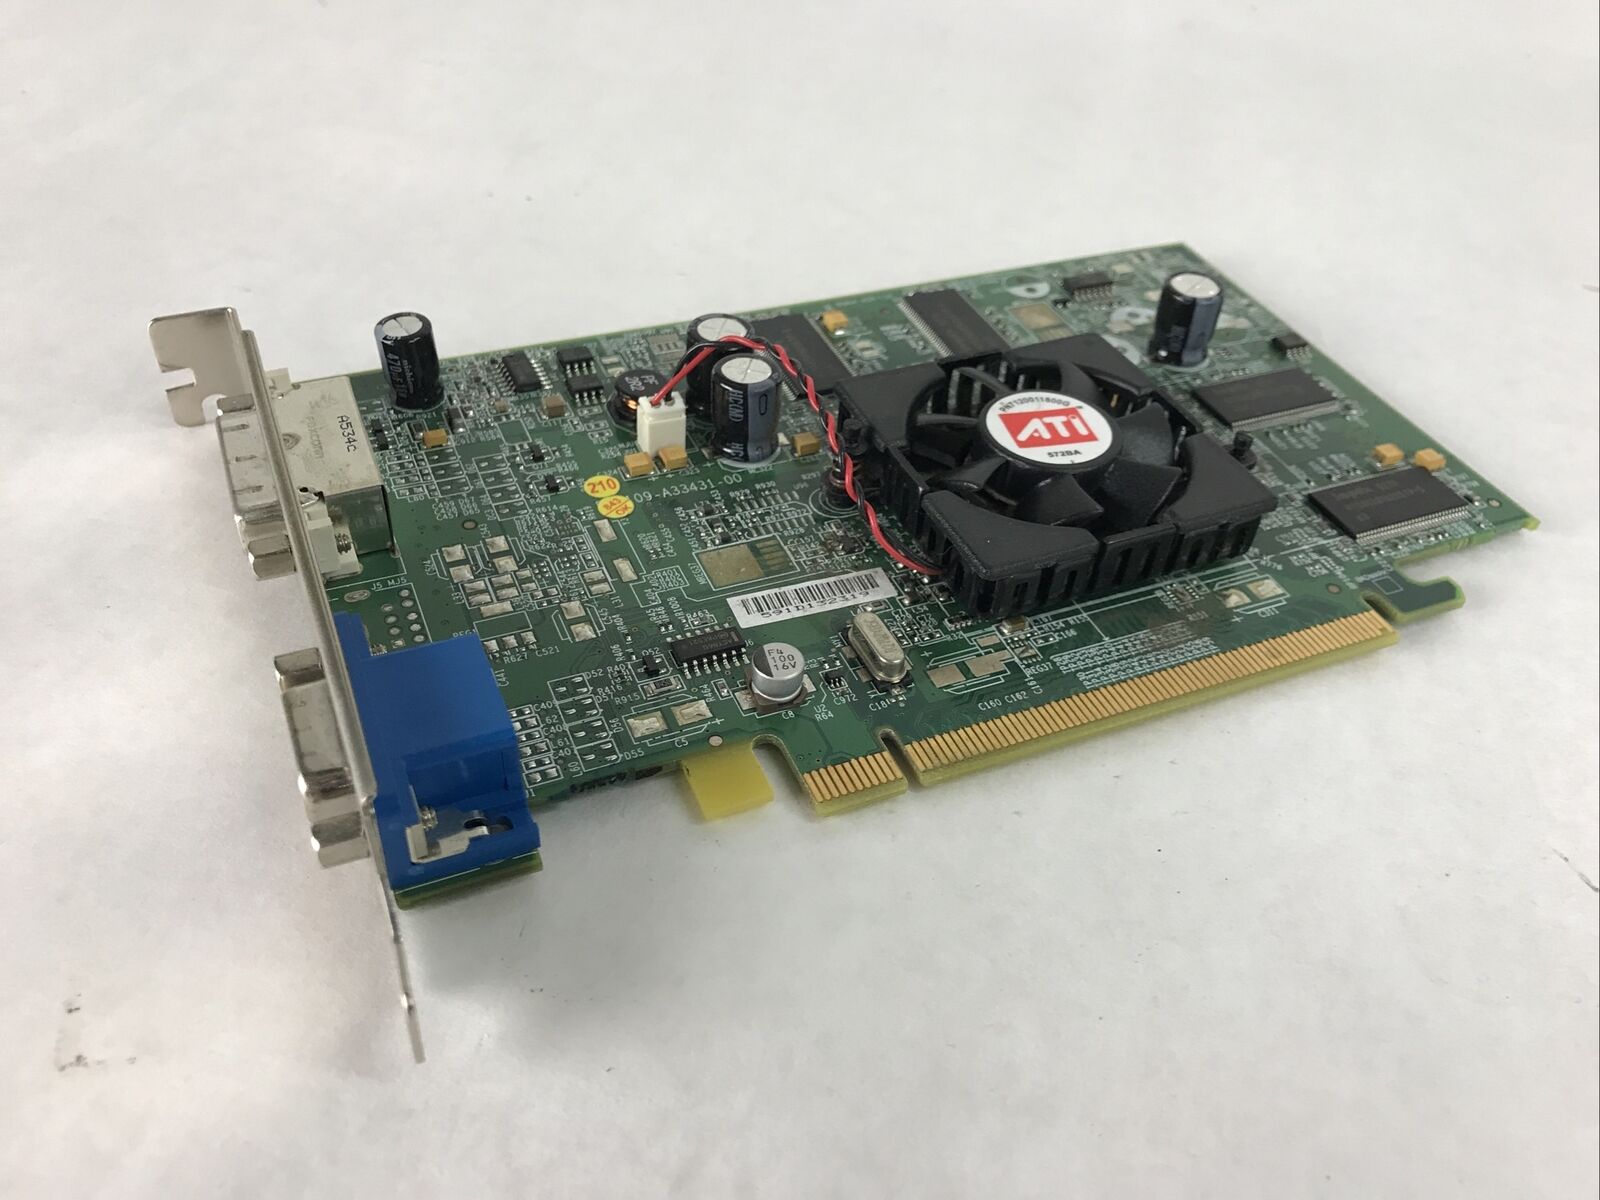 Dell SE128MB Video Card PCIe D33A27